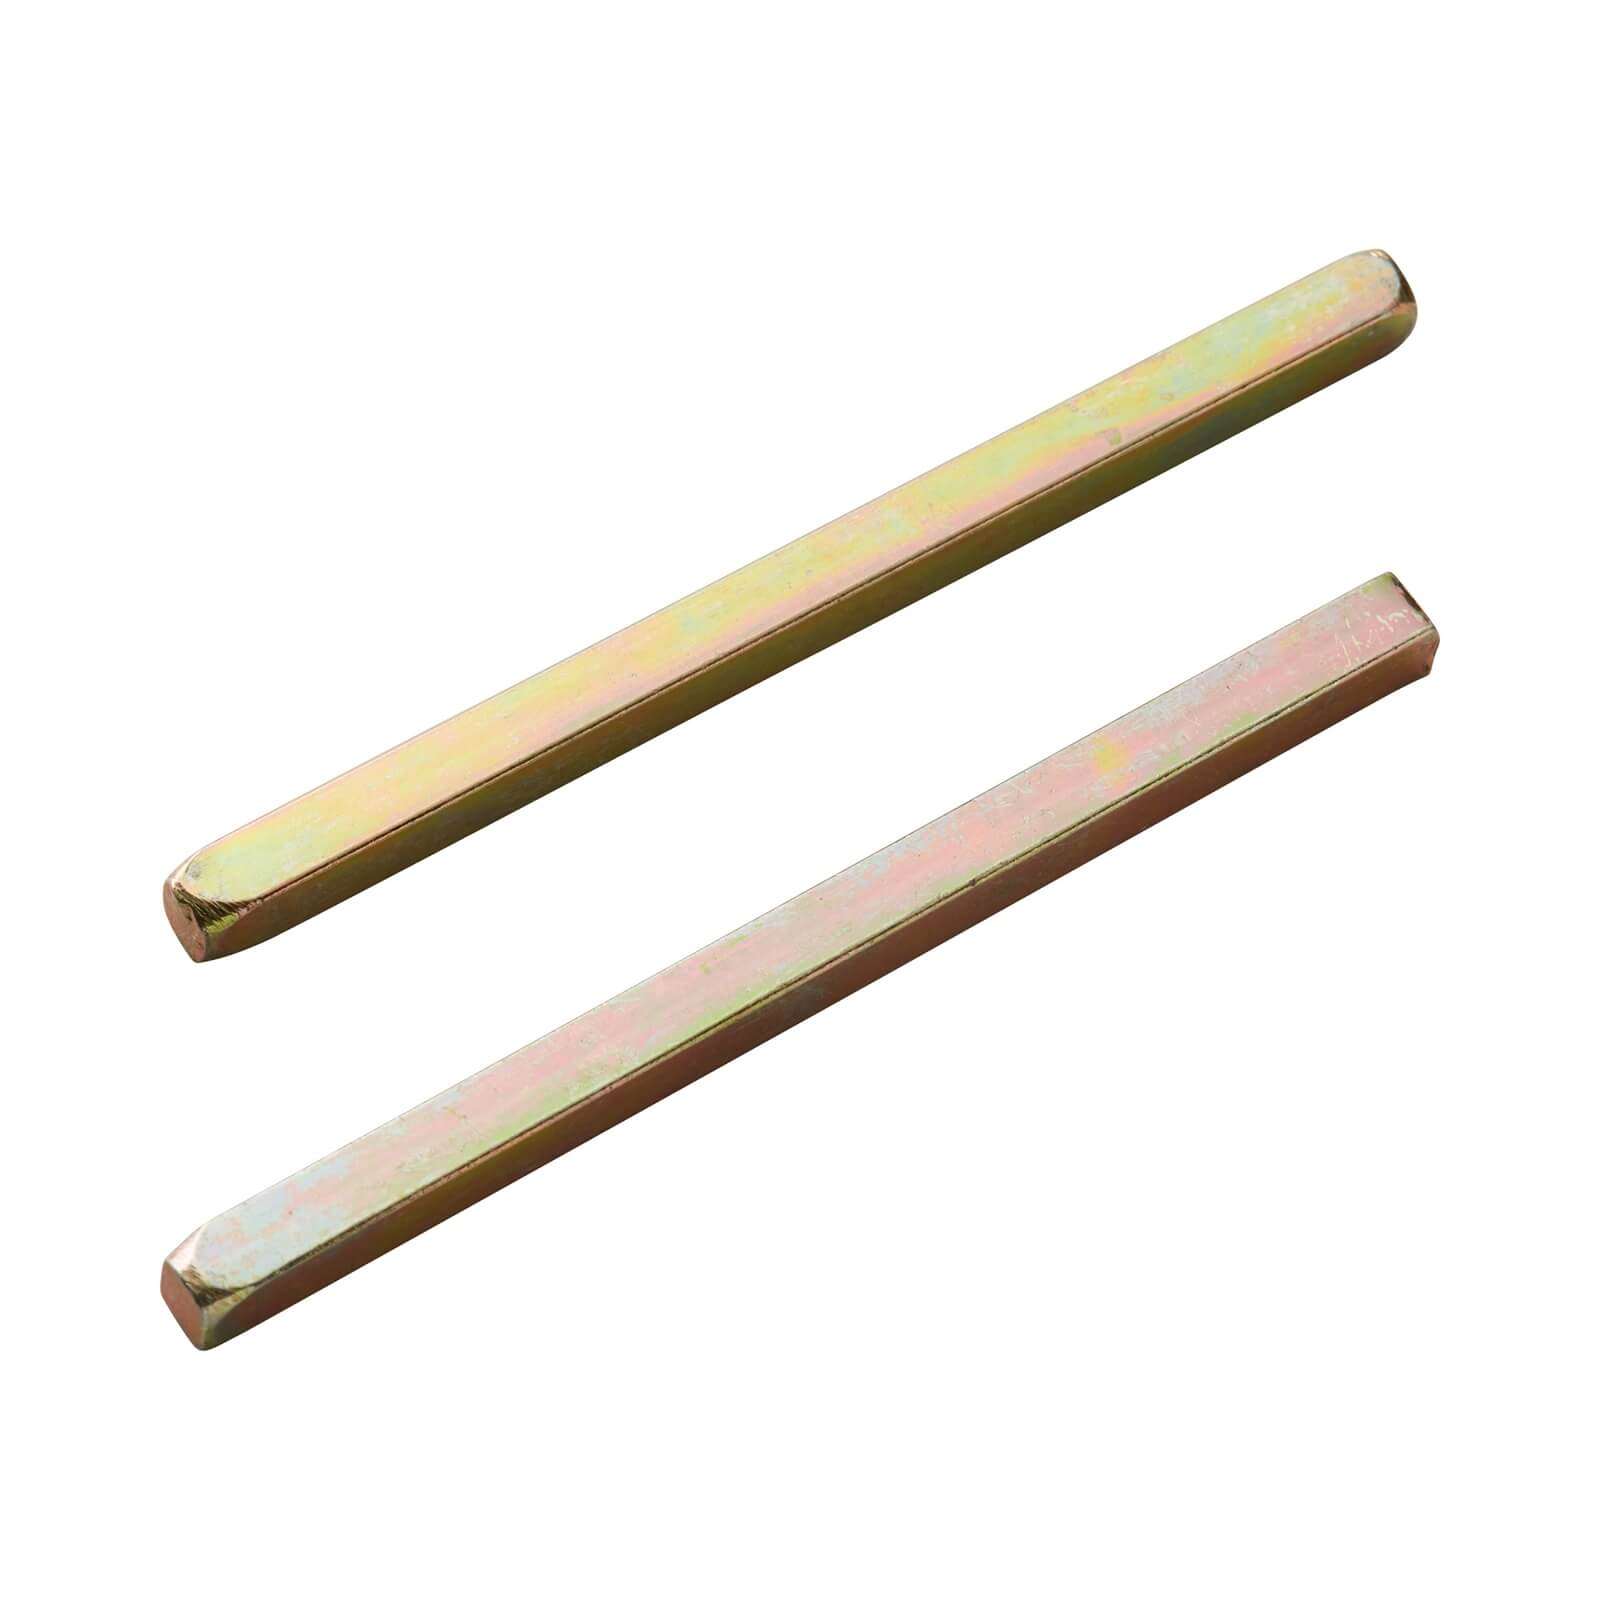 Photo of Spare Spindles Steel 8mm X 85mm - Pack Of 2